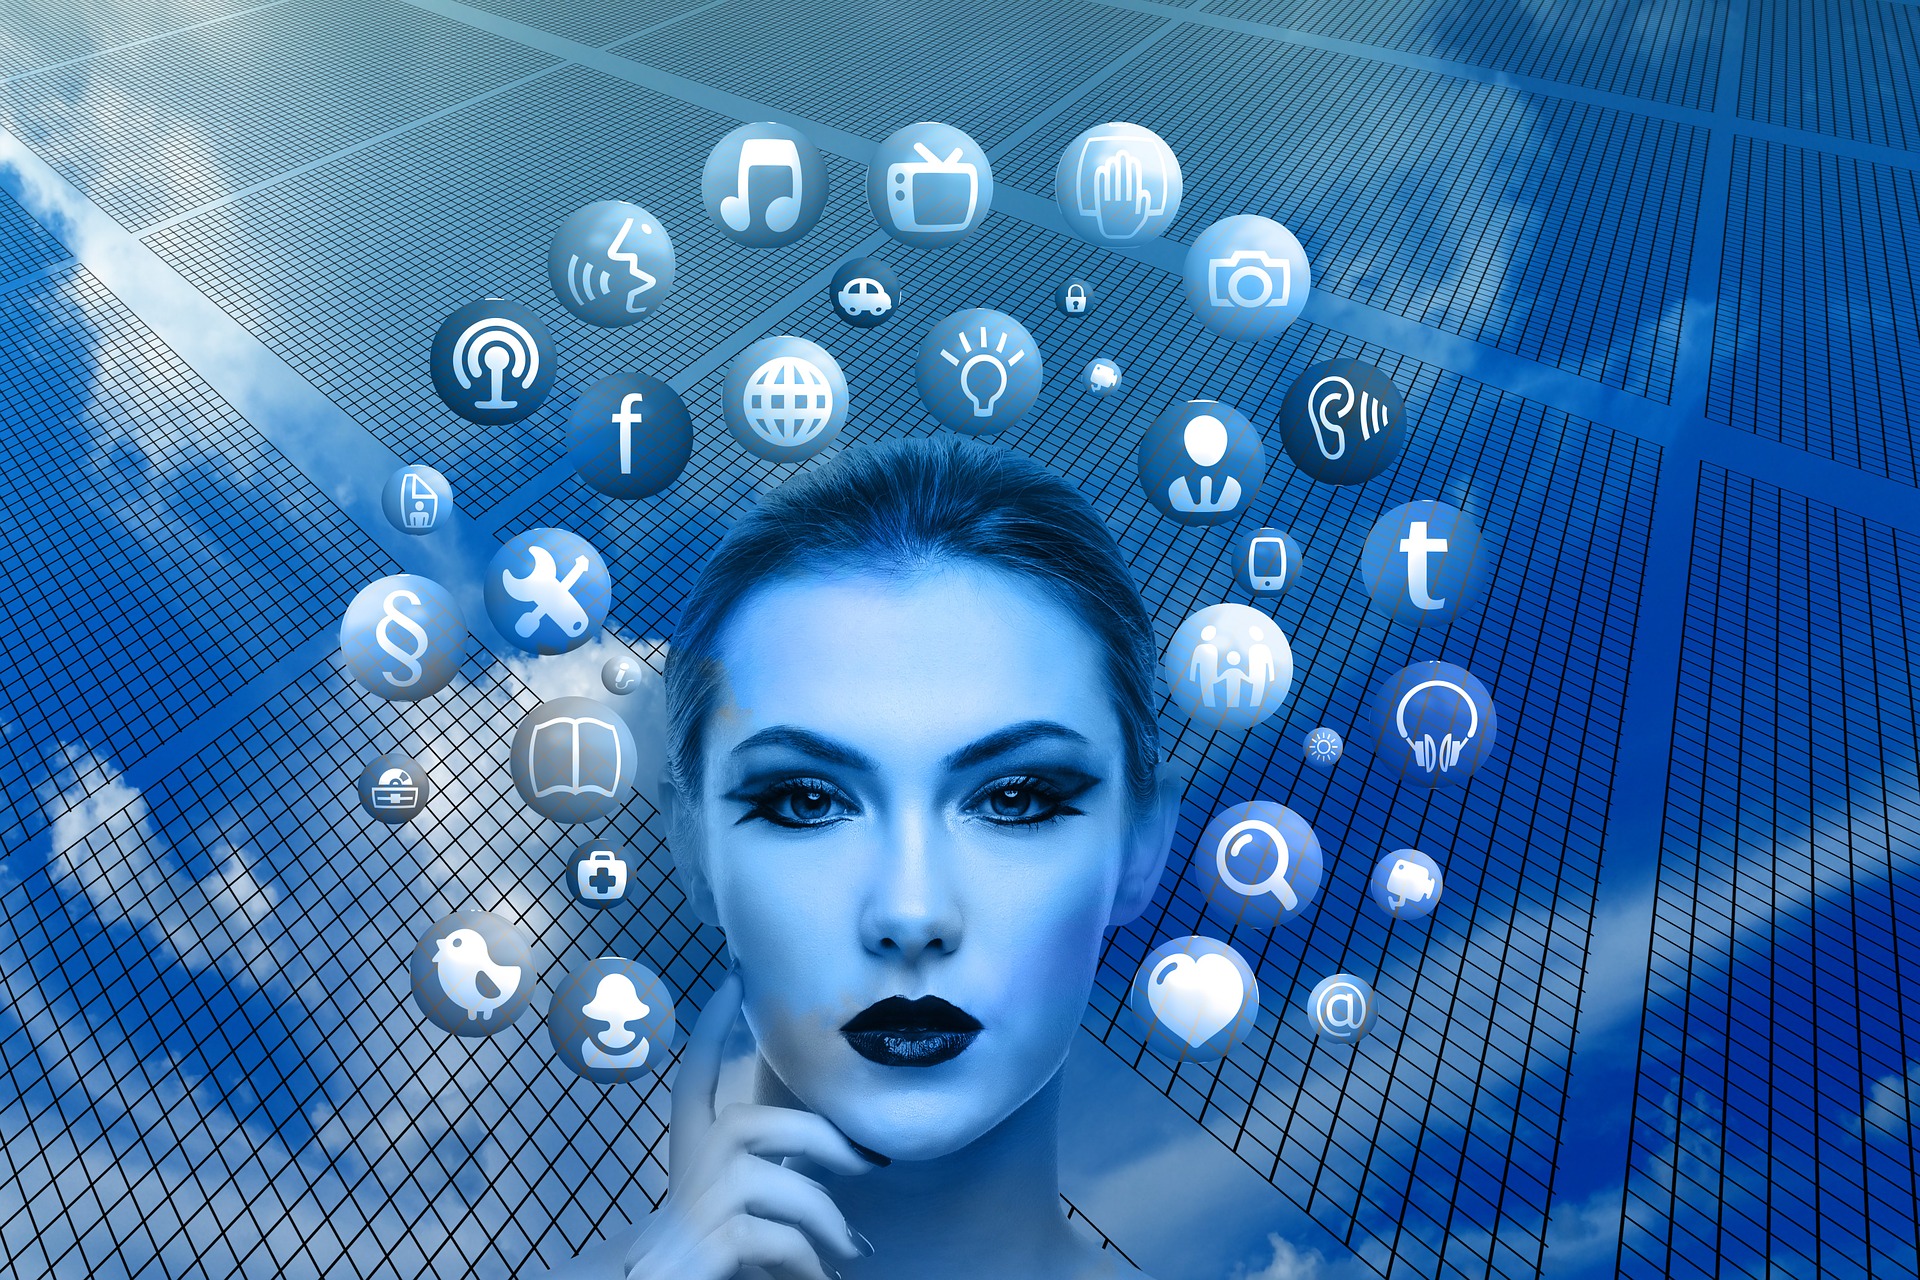 A blue image showing a women with social media icons resembling social listening for hotel marketing in 2019